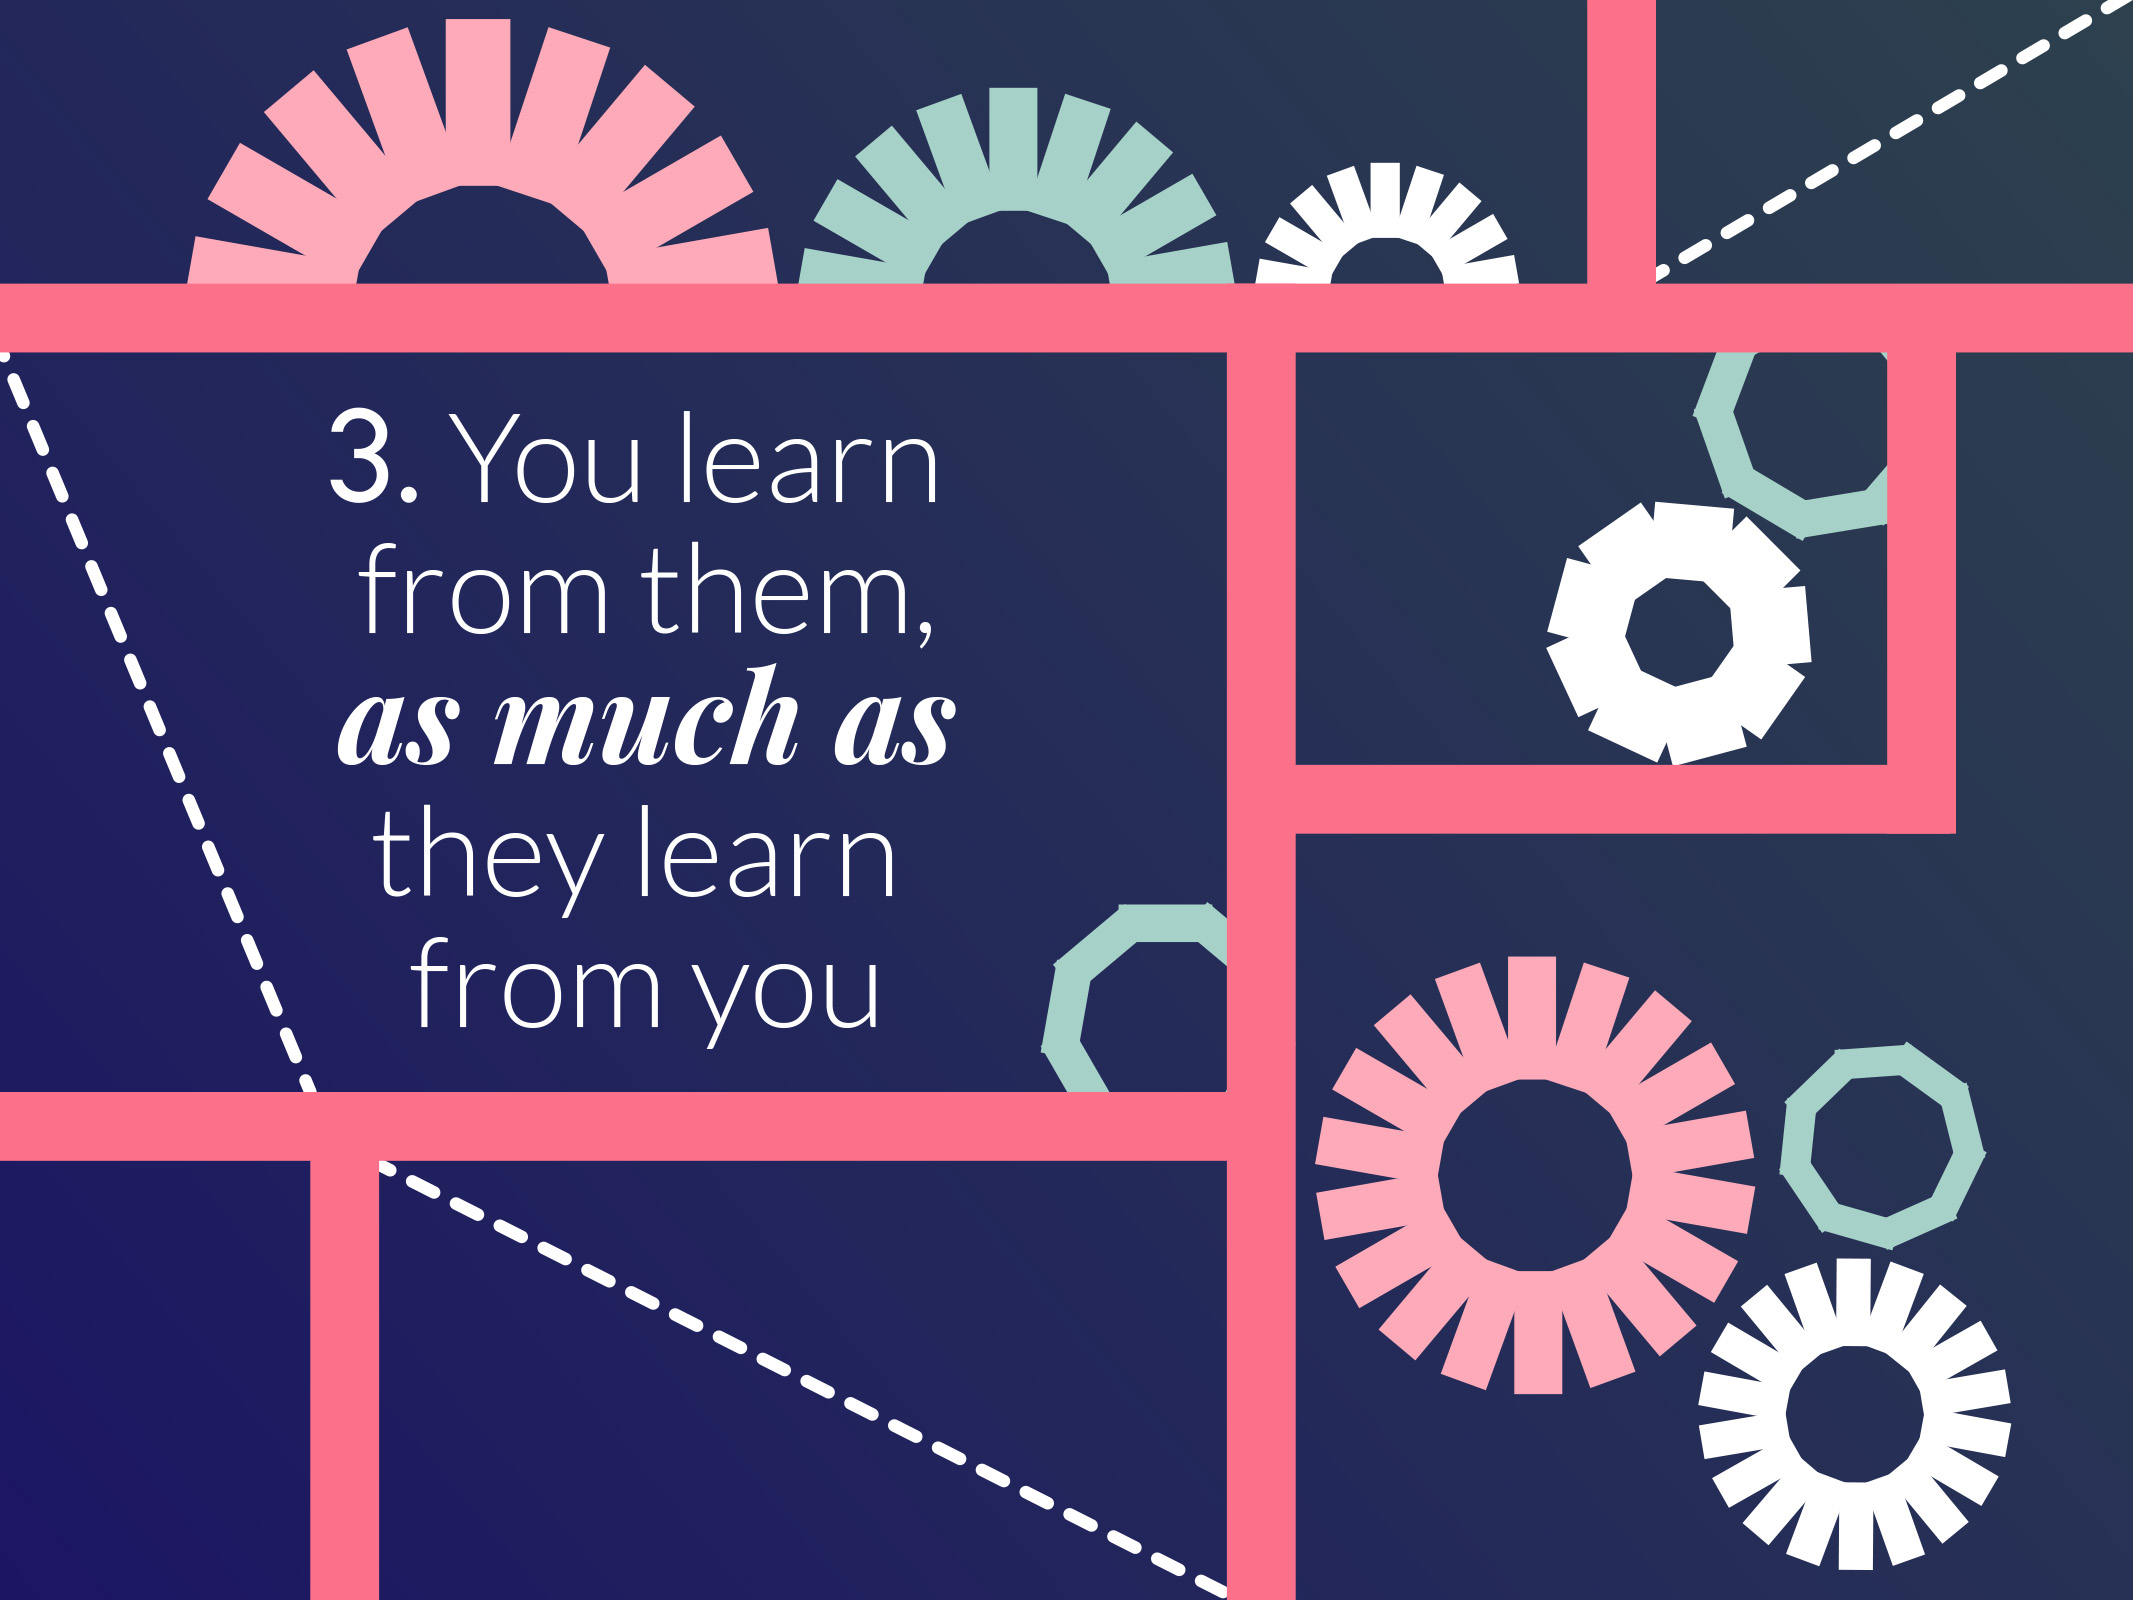 Vector illustration features a set of interlocking gears or cogs, symbolising the process of learning and knowledge exchange in mentoring. The cogs are in shades of pink, teal, and white against a dark blue background. The image includes the words '3. You learn from them, as much as they learn from you' in white text.